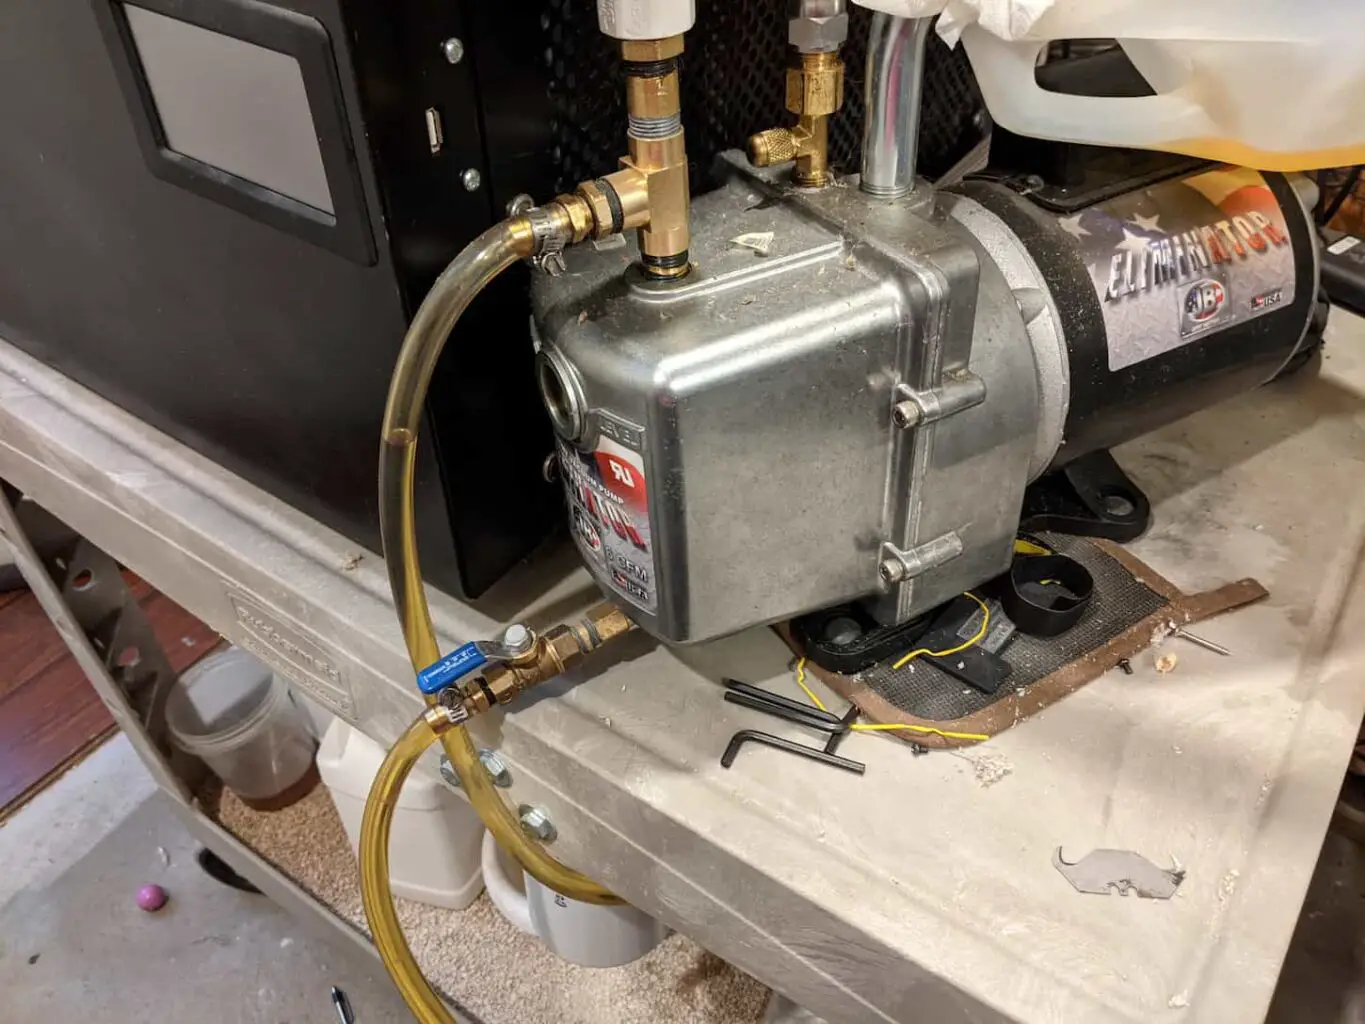 An image of freeze-dryer vacuum pump at Starr family's house.